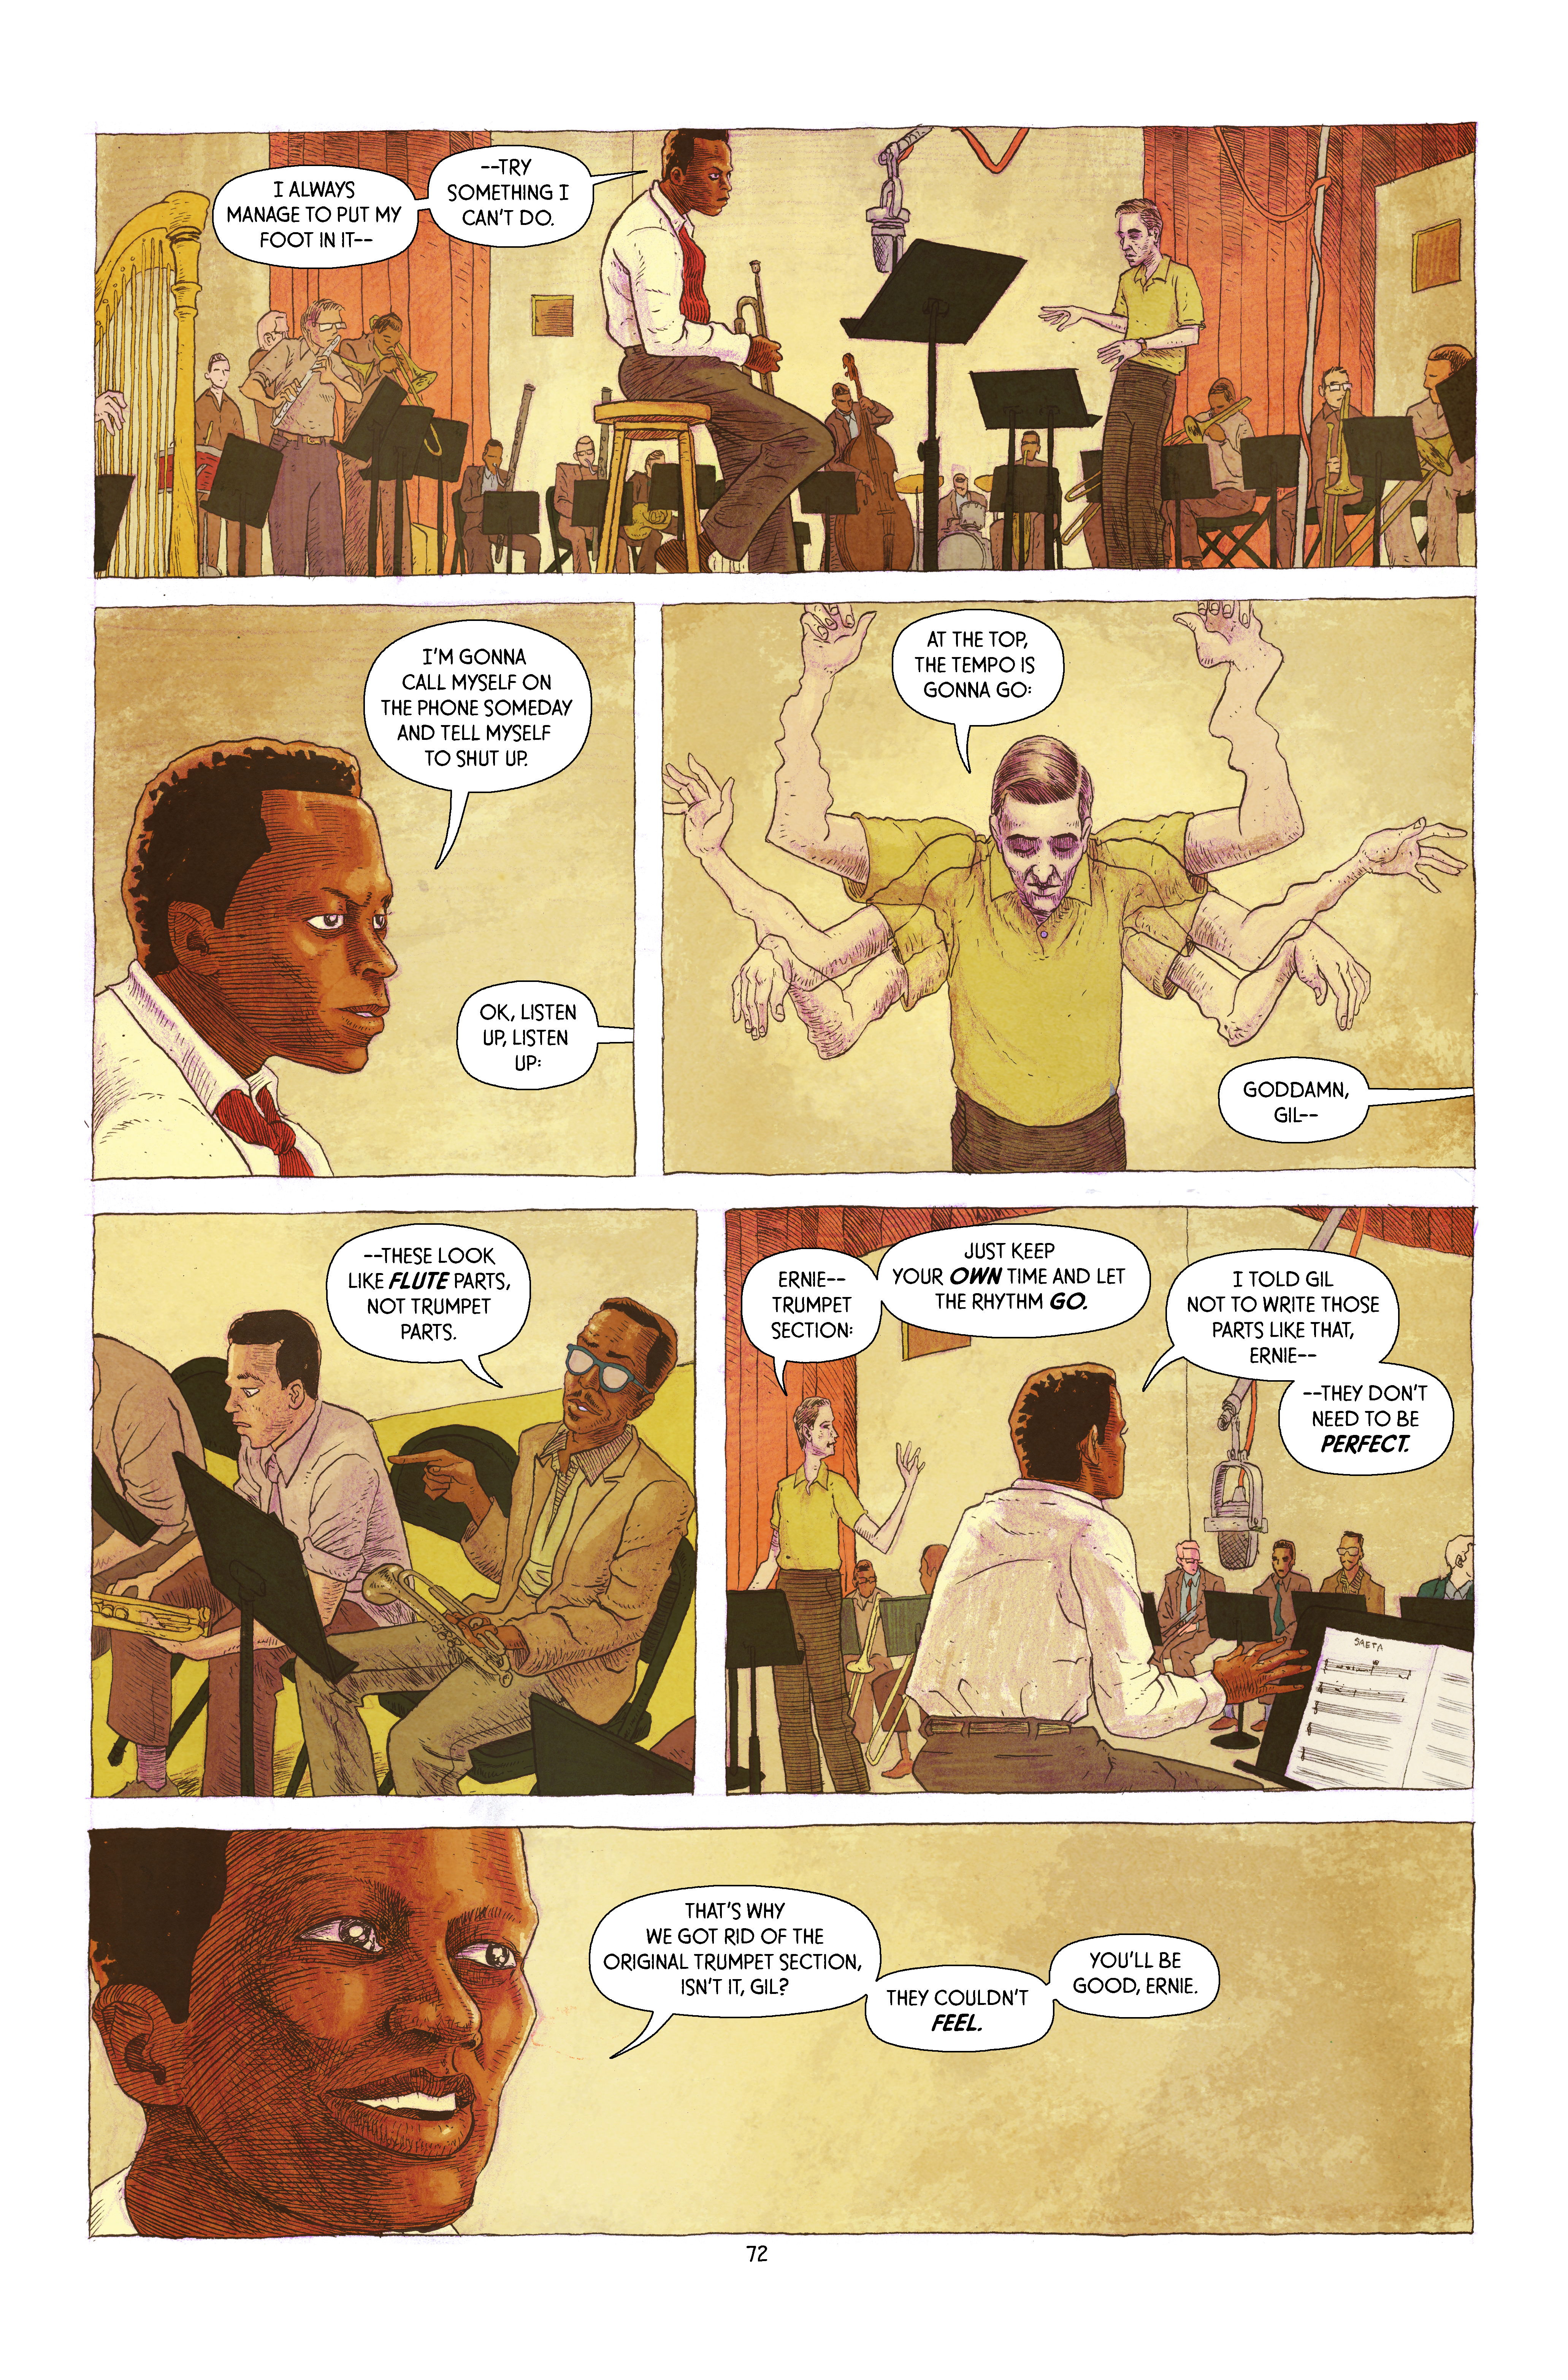 Comics interior page from Miles Davis and the Search for the Sound